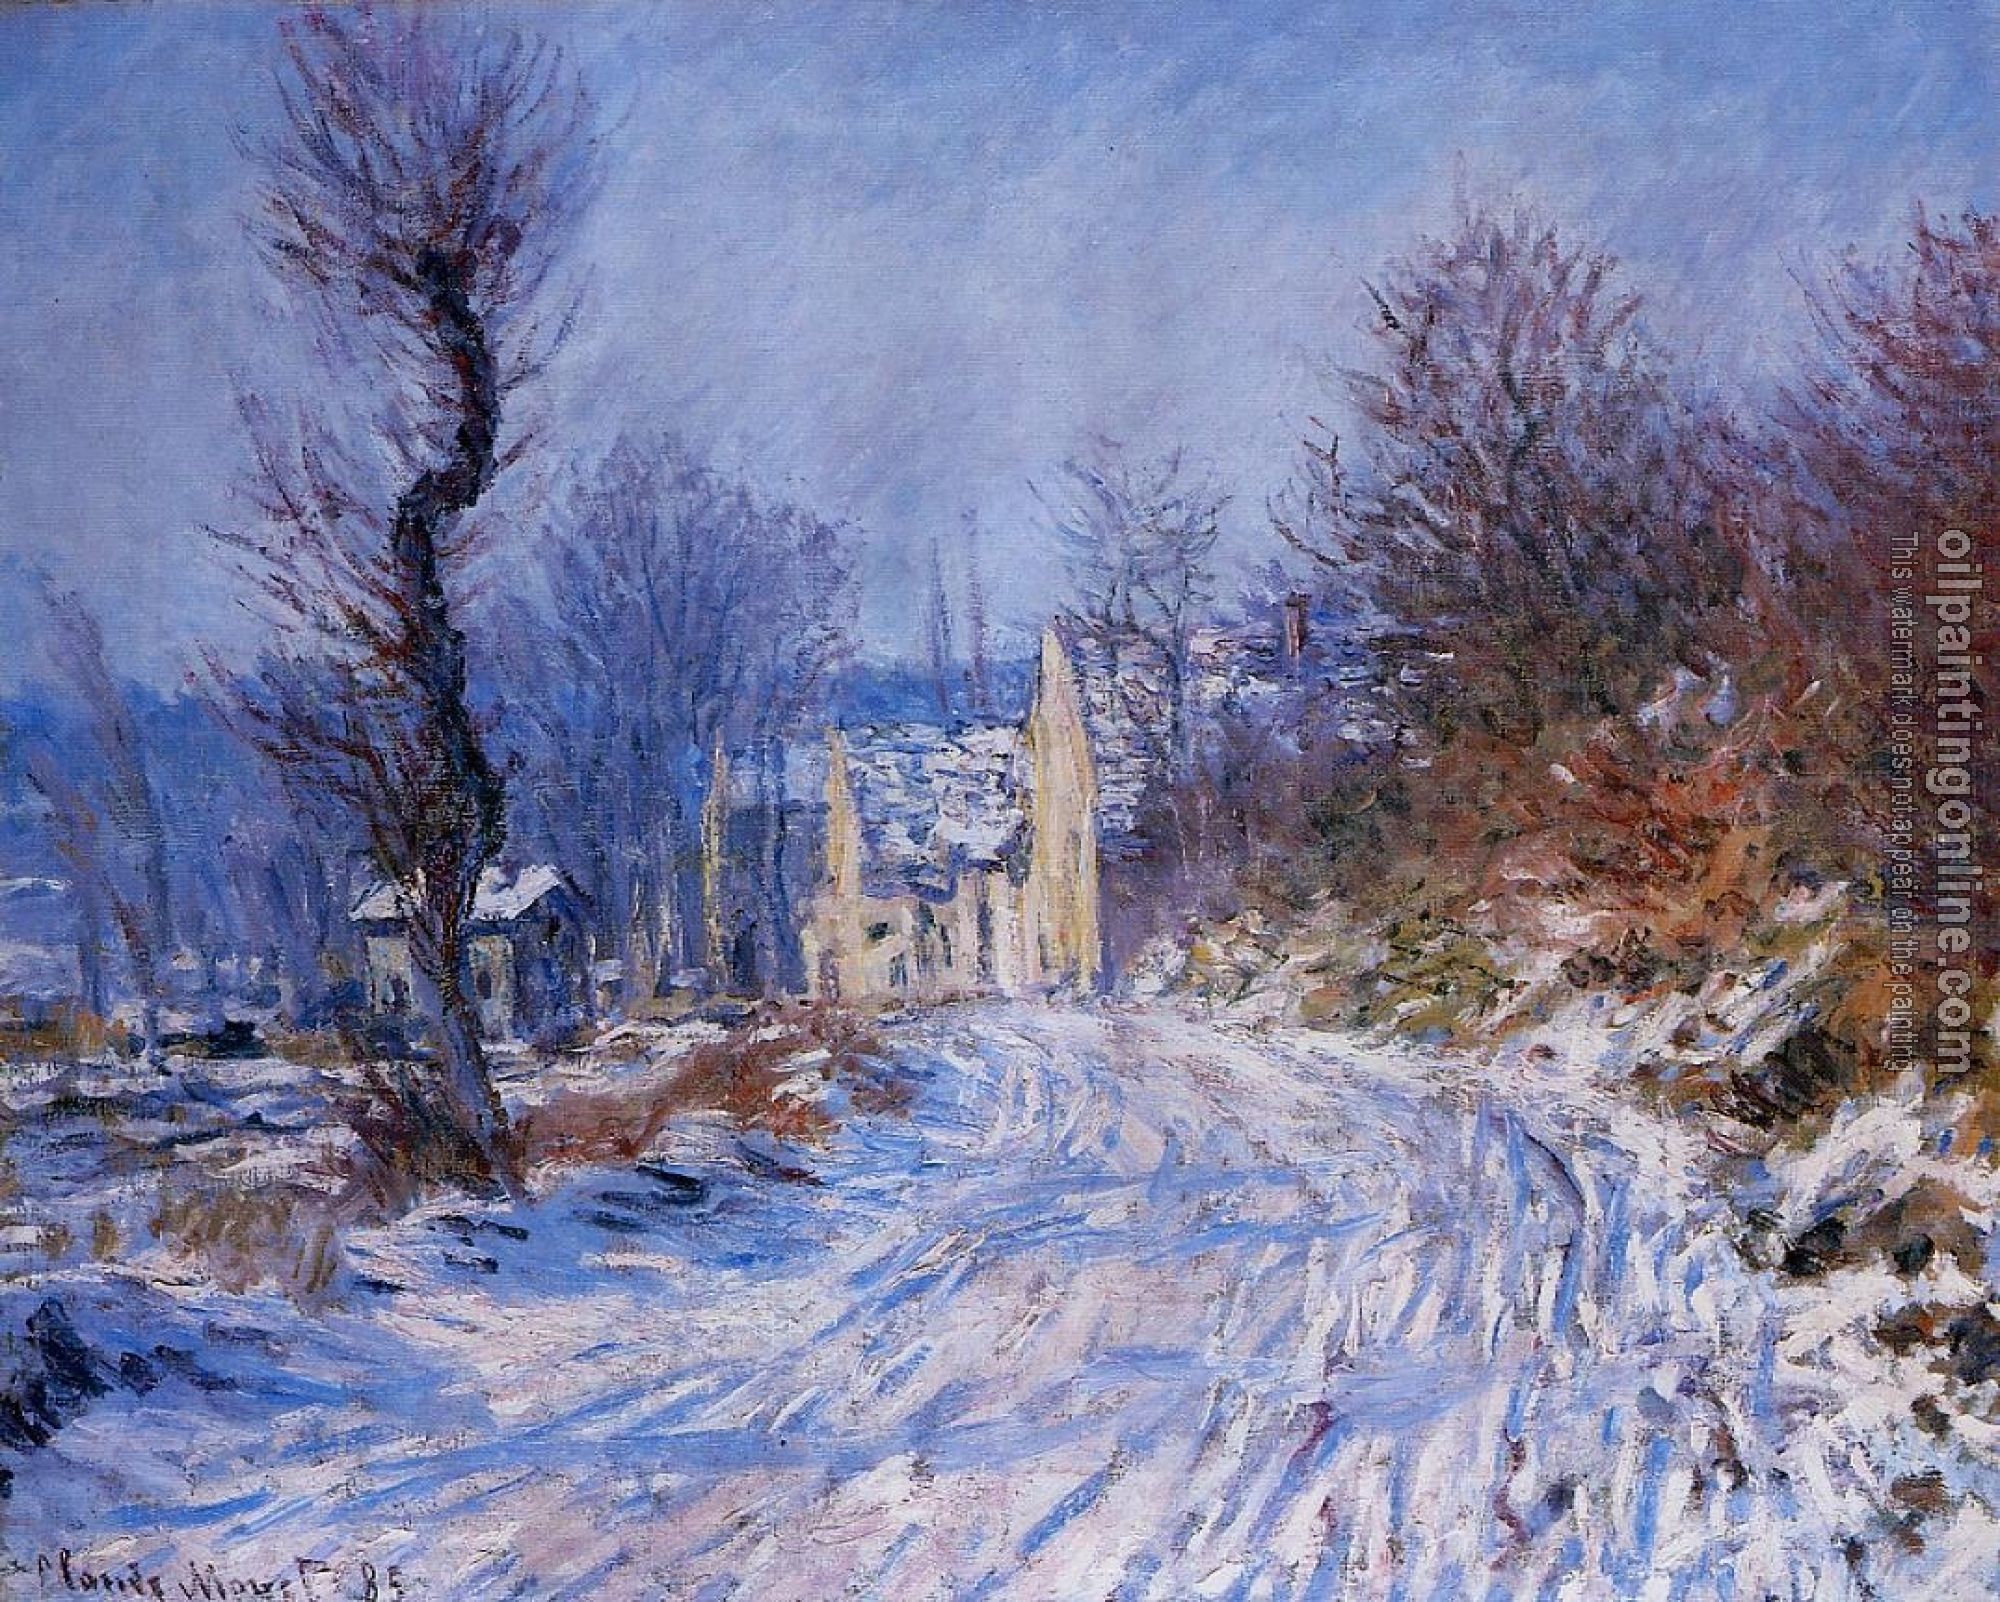 Monet, Claude Oscar - Road to Giverny in Winter